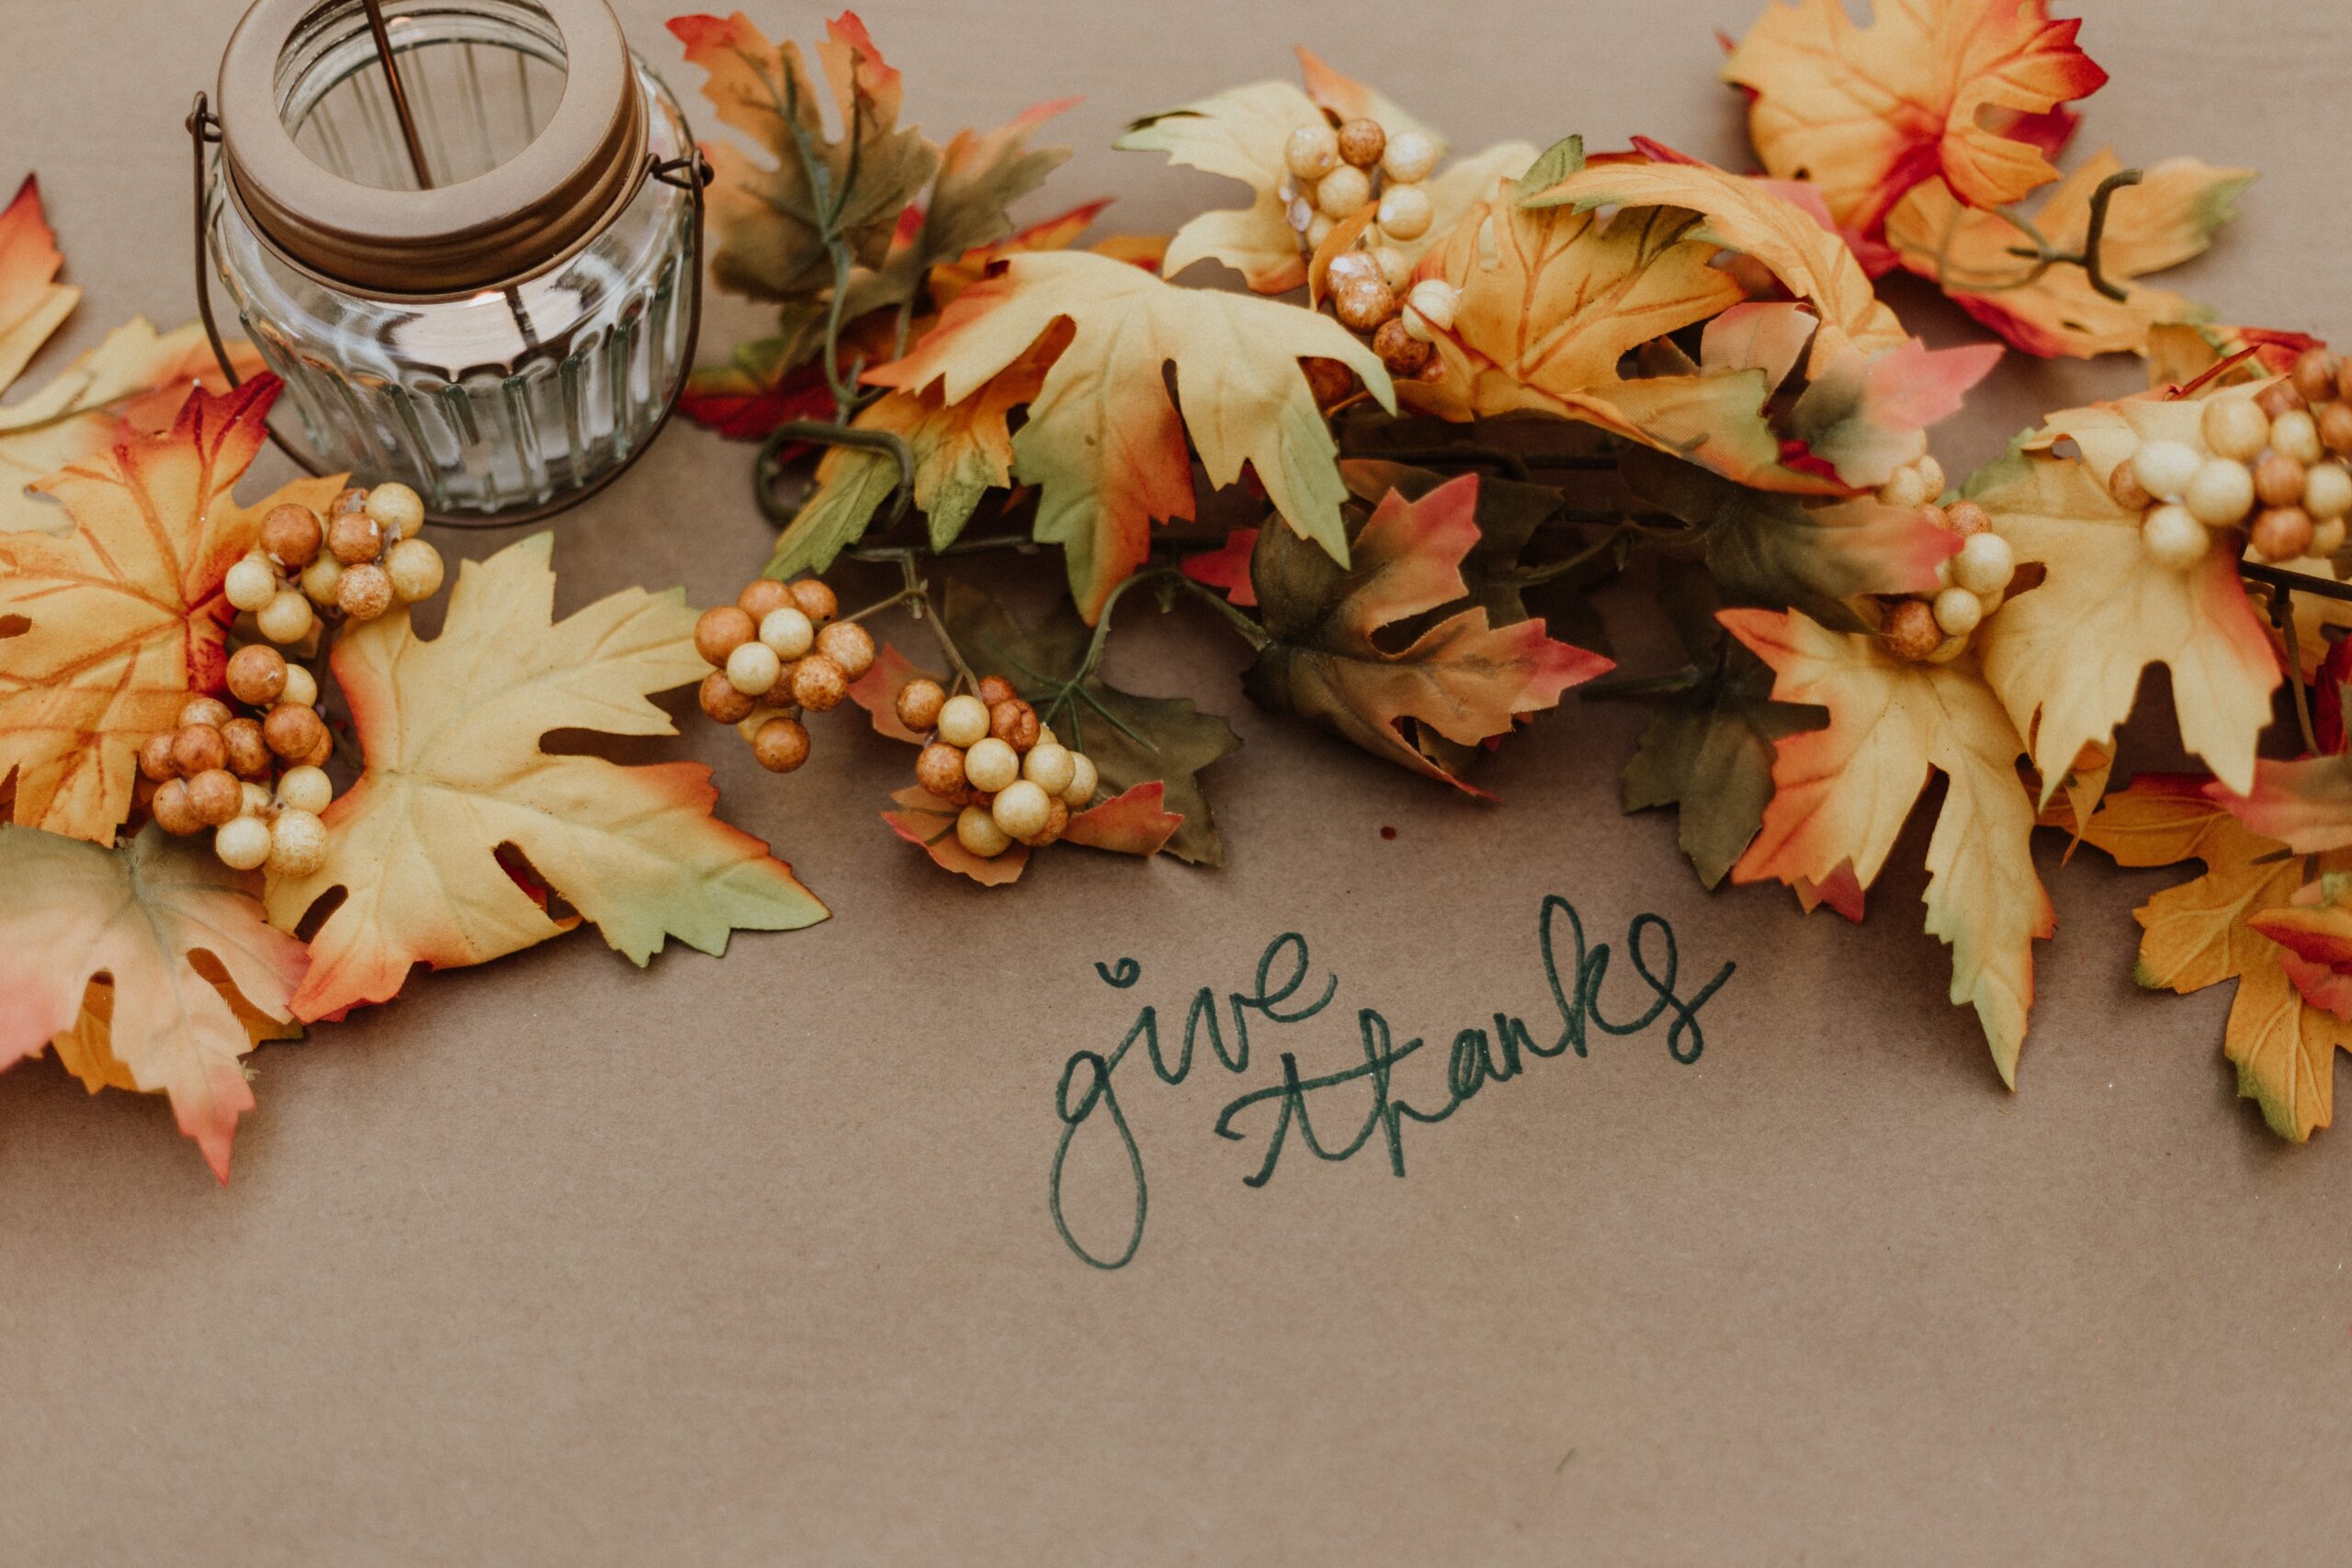 Fall aesthetic can boost your mental, physical, and social wellness